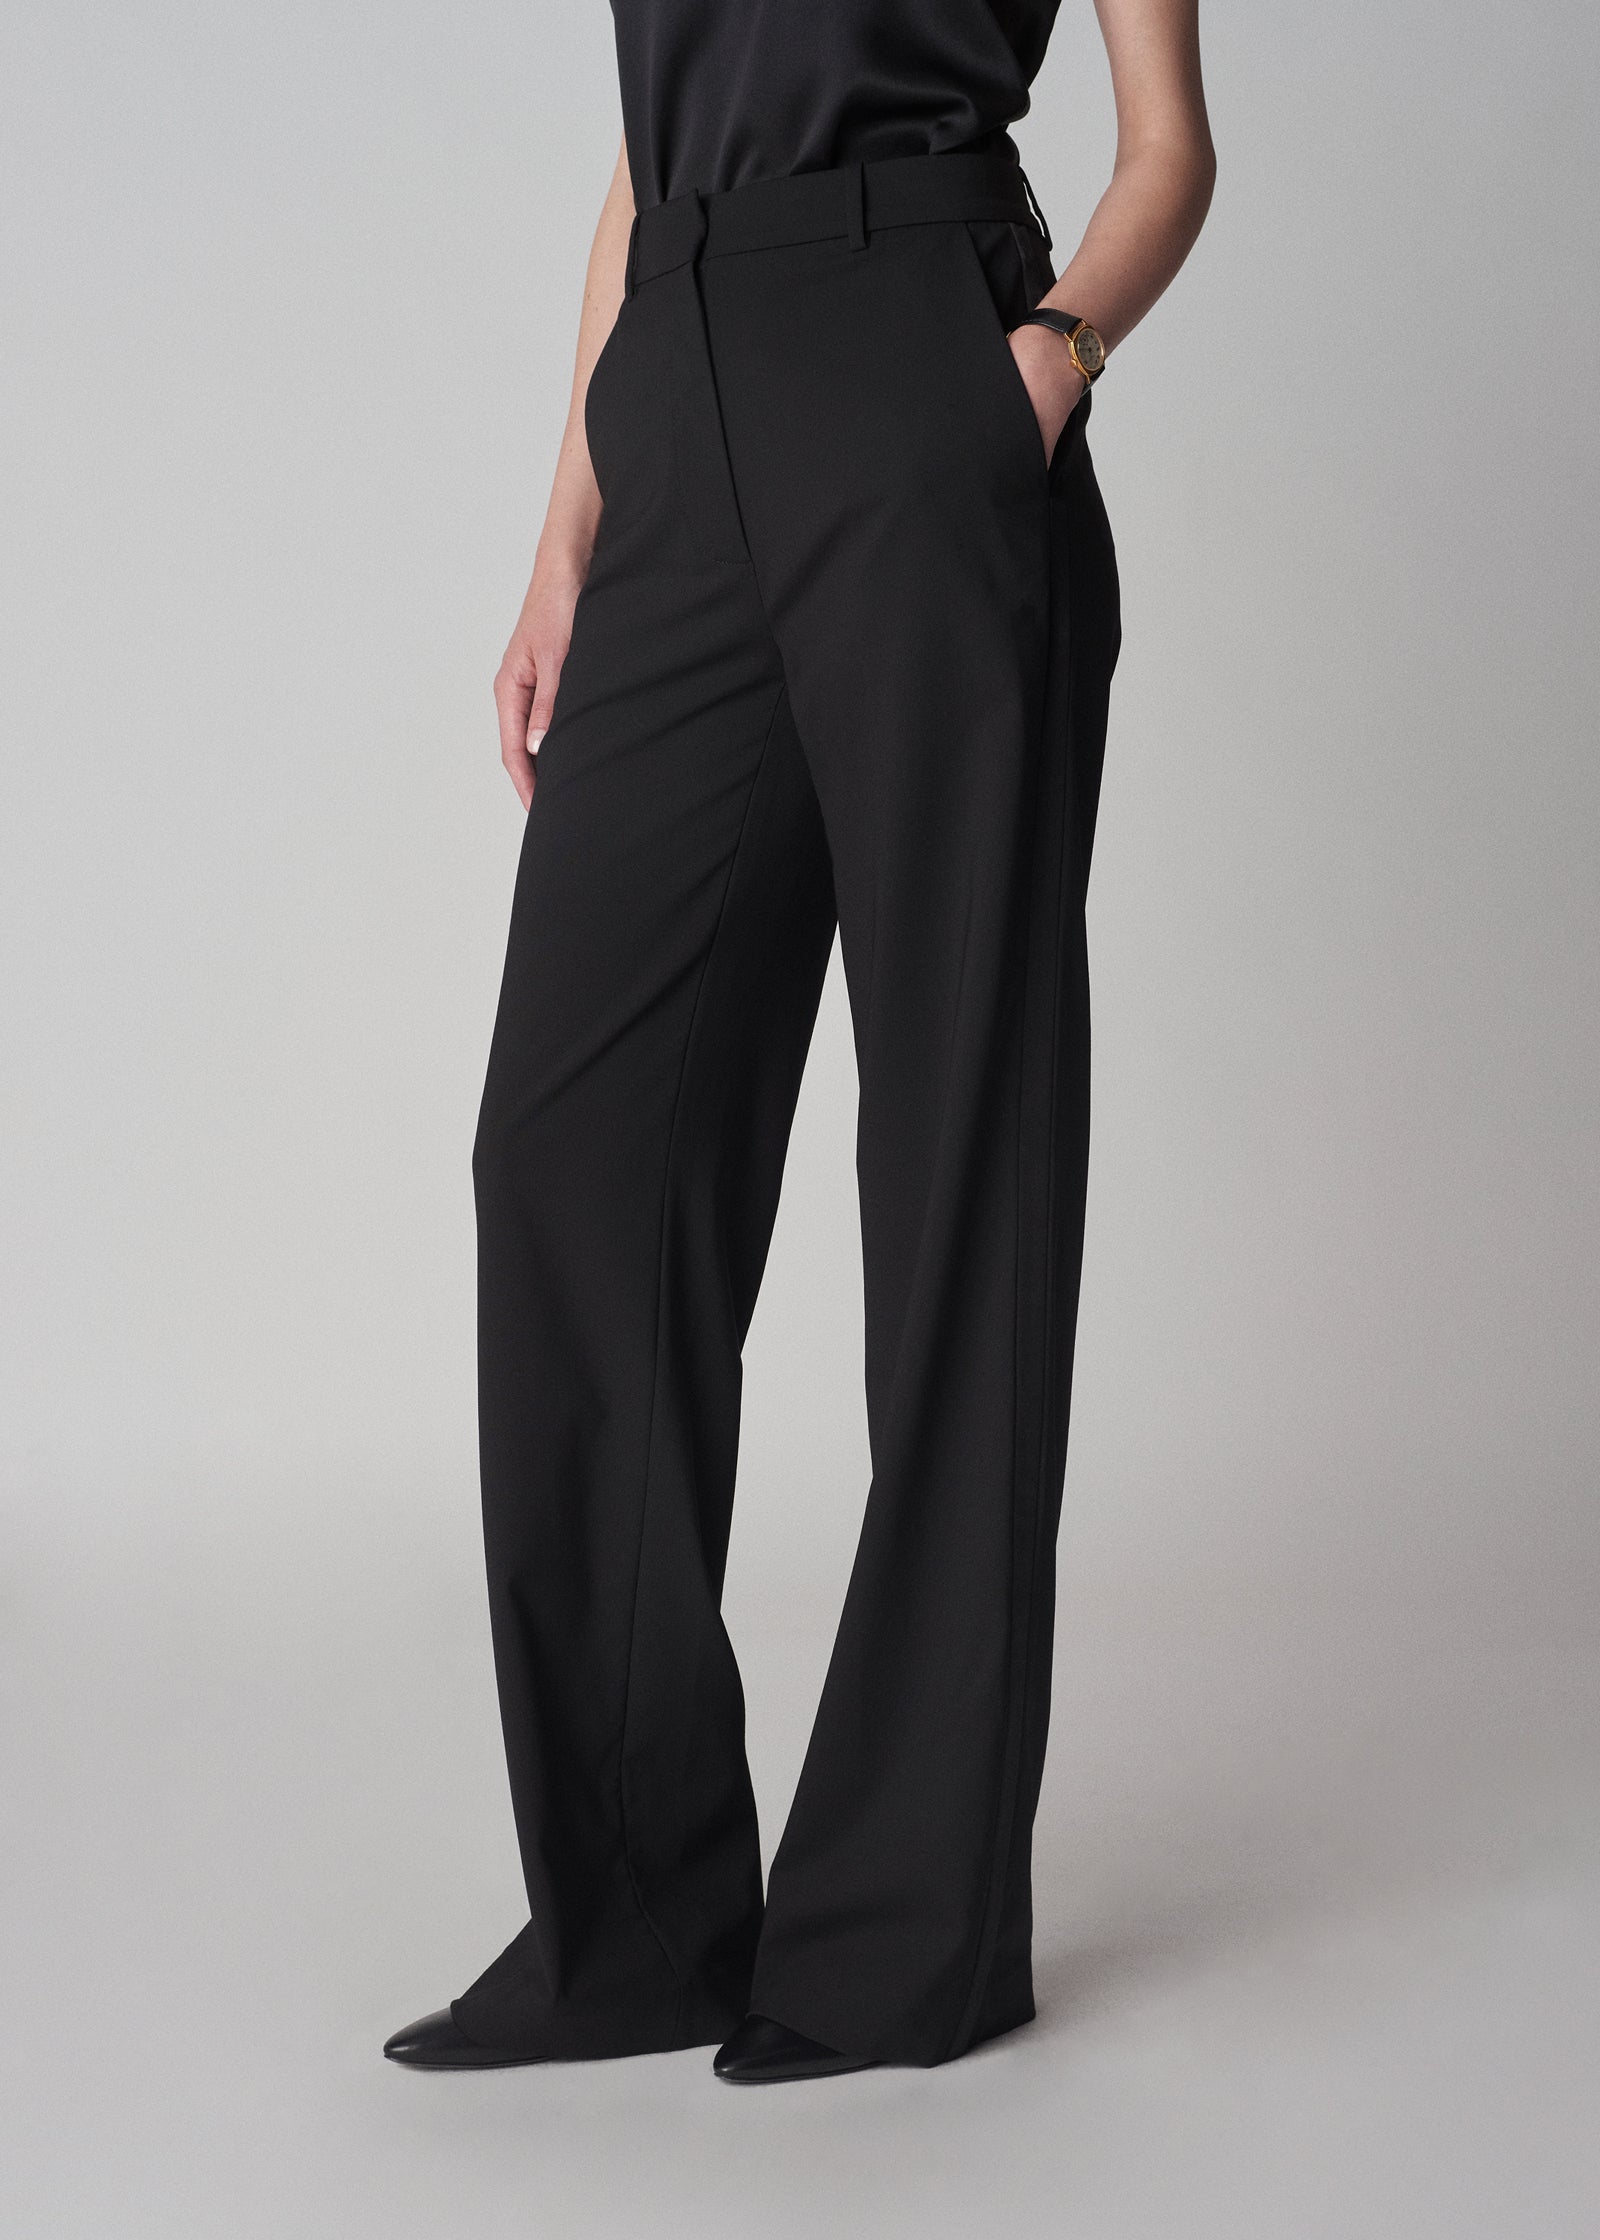 Tuxedo Pant in Wool and SIlk - Black - CO Collections